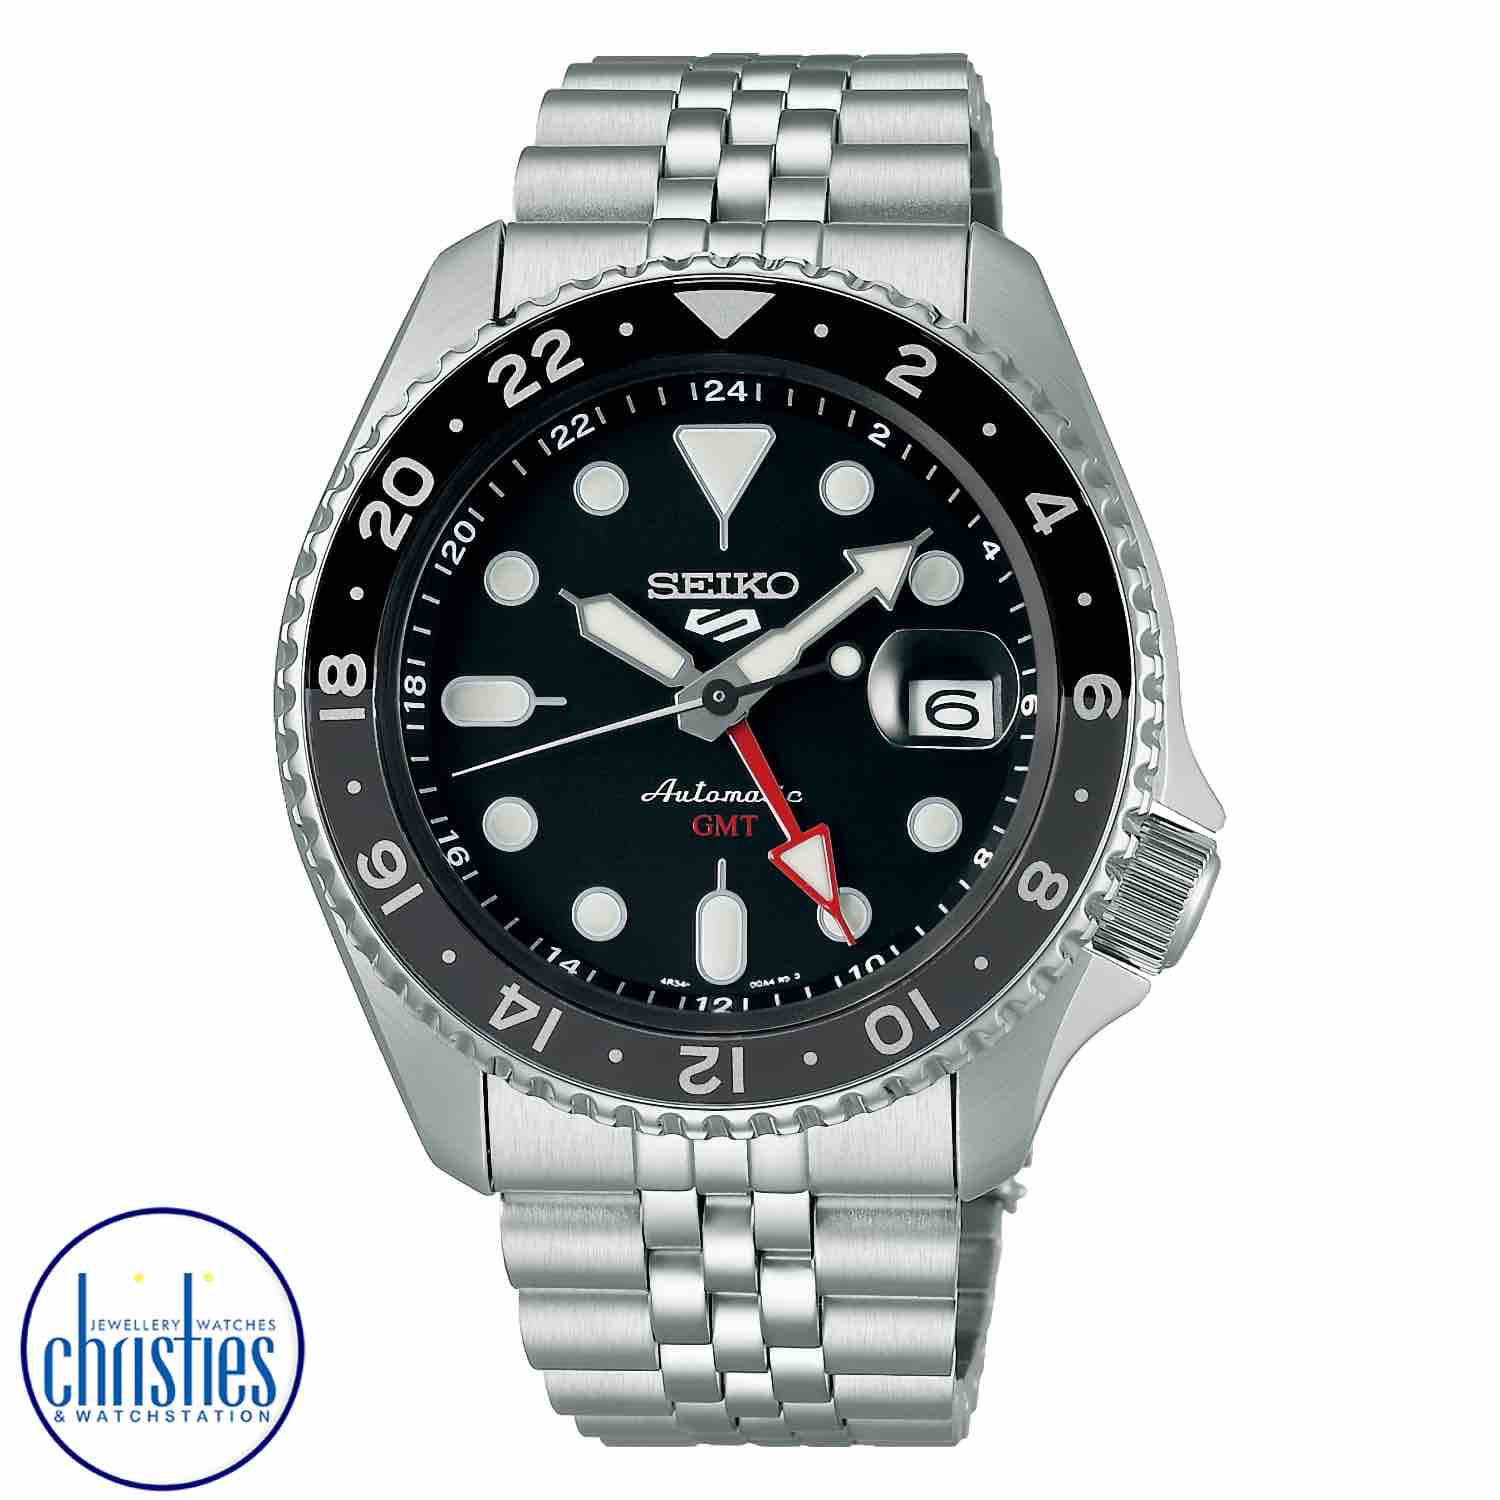 SSK001 Seiko 5 Sports SKX Sports Style GMT Series. Experience the perfect combination of durability, reliability, and international convenience with the Seiko 5 Sports SKX Sports Style GMT Series.